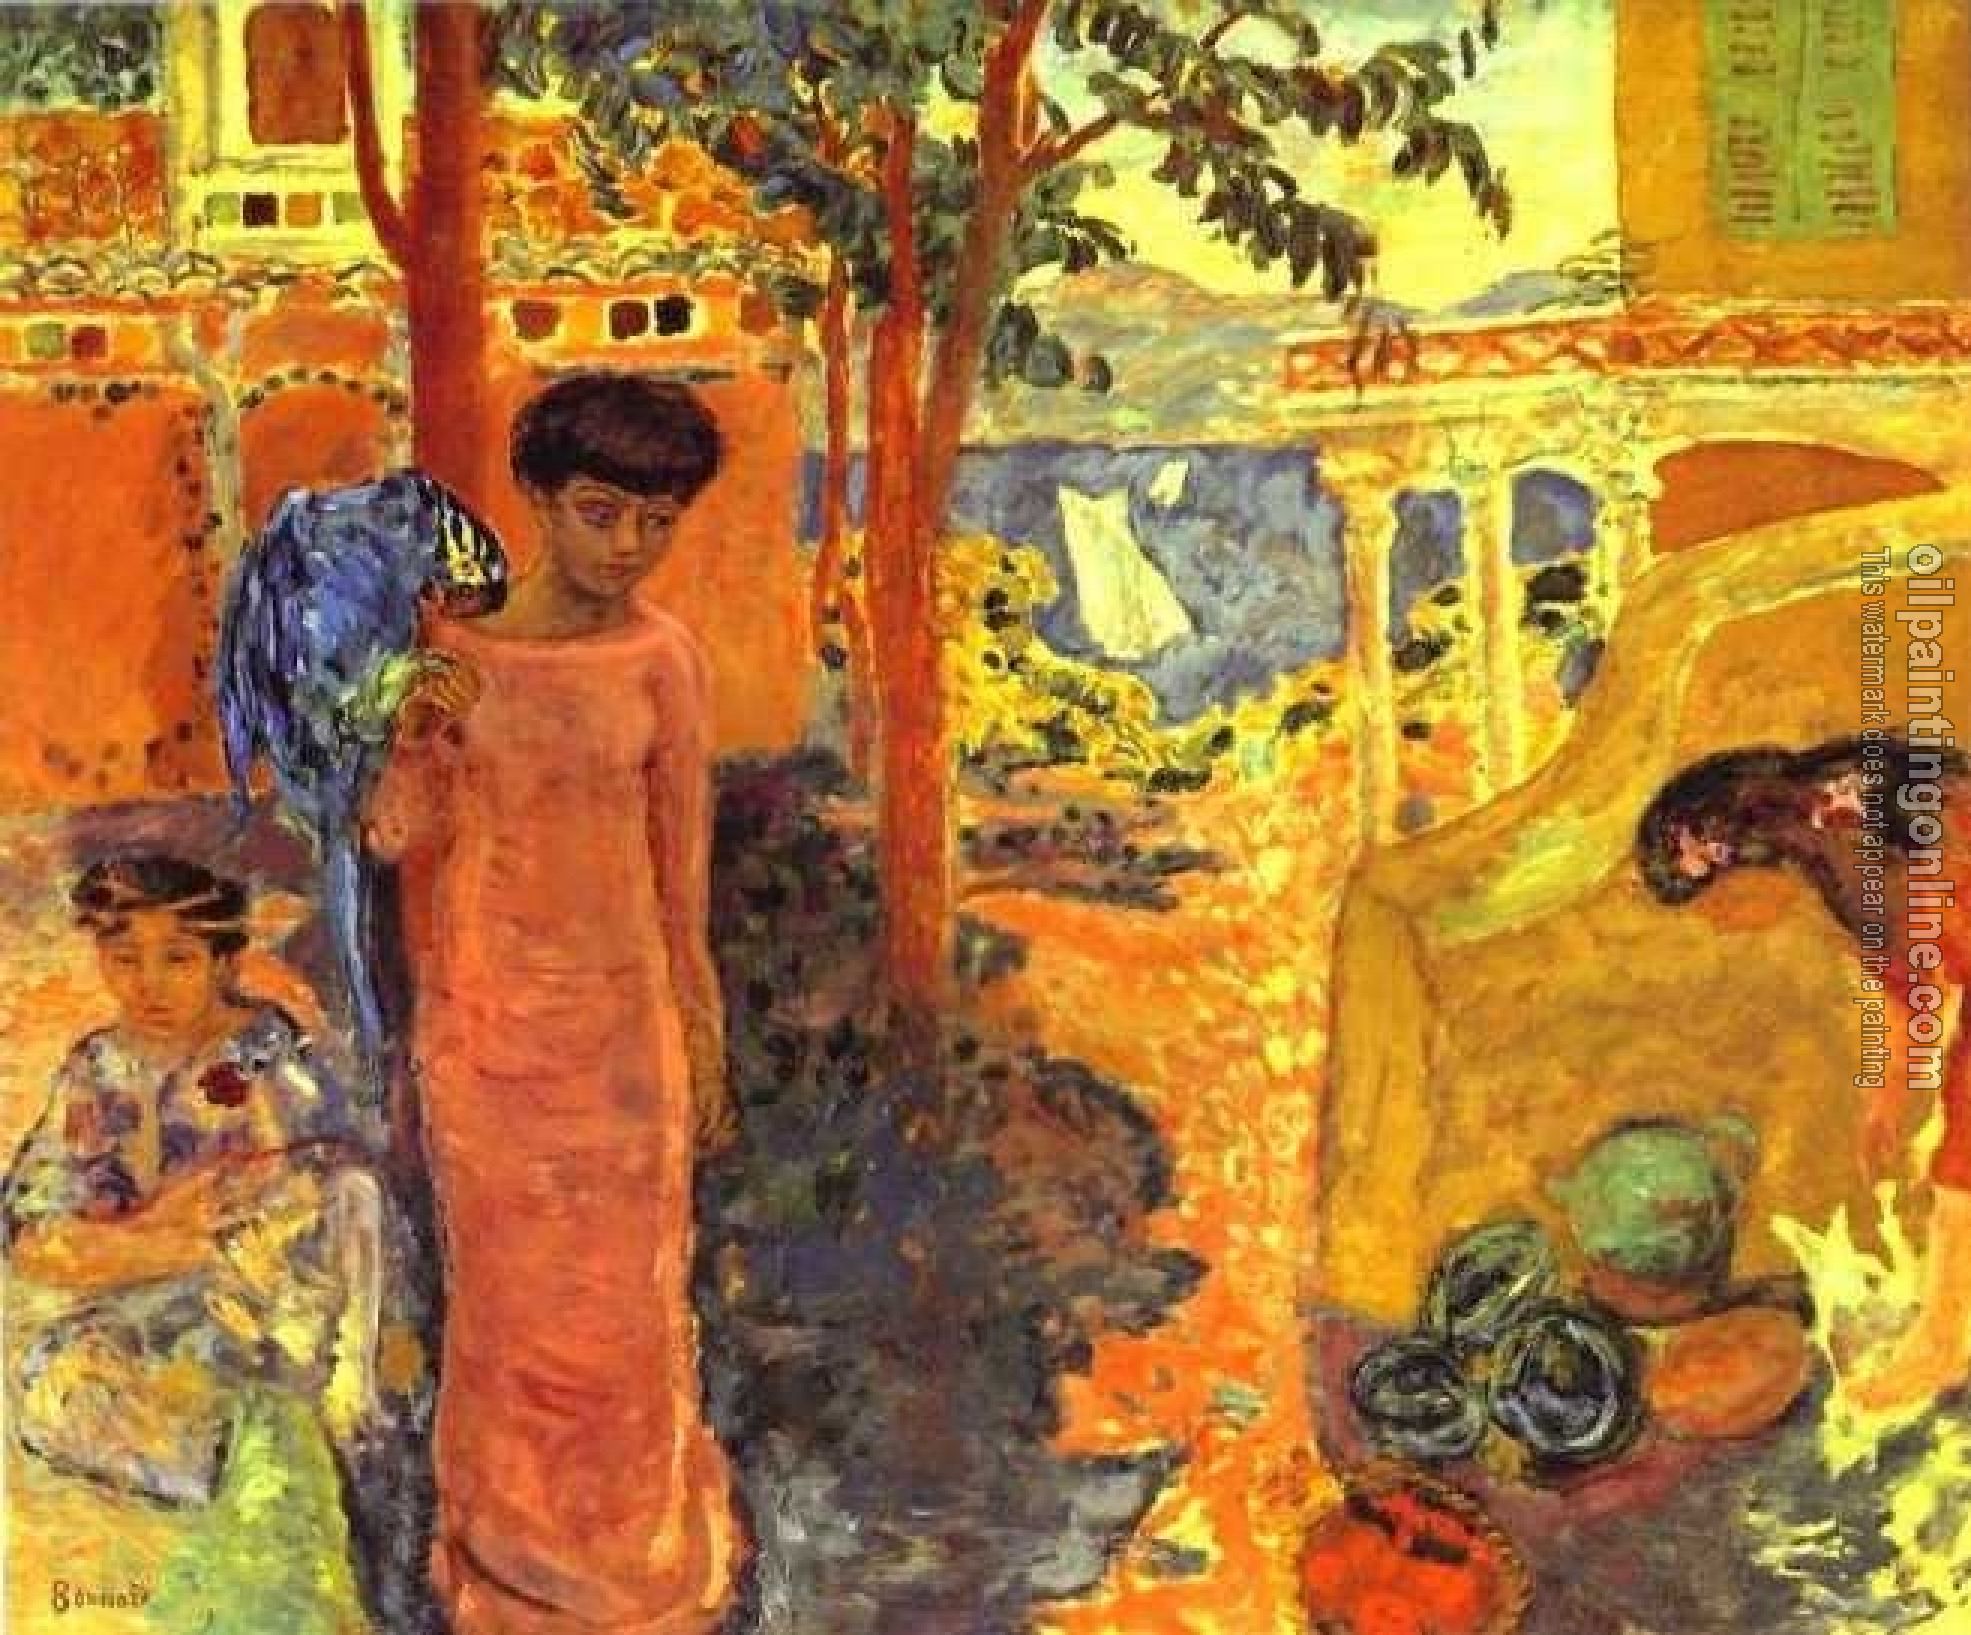 Pierre Bonnard - Girl with Parrot